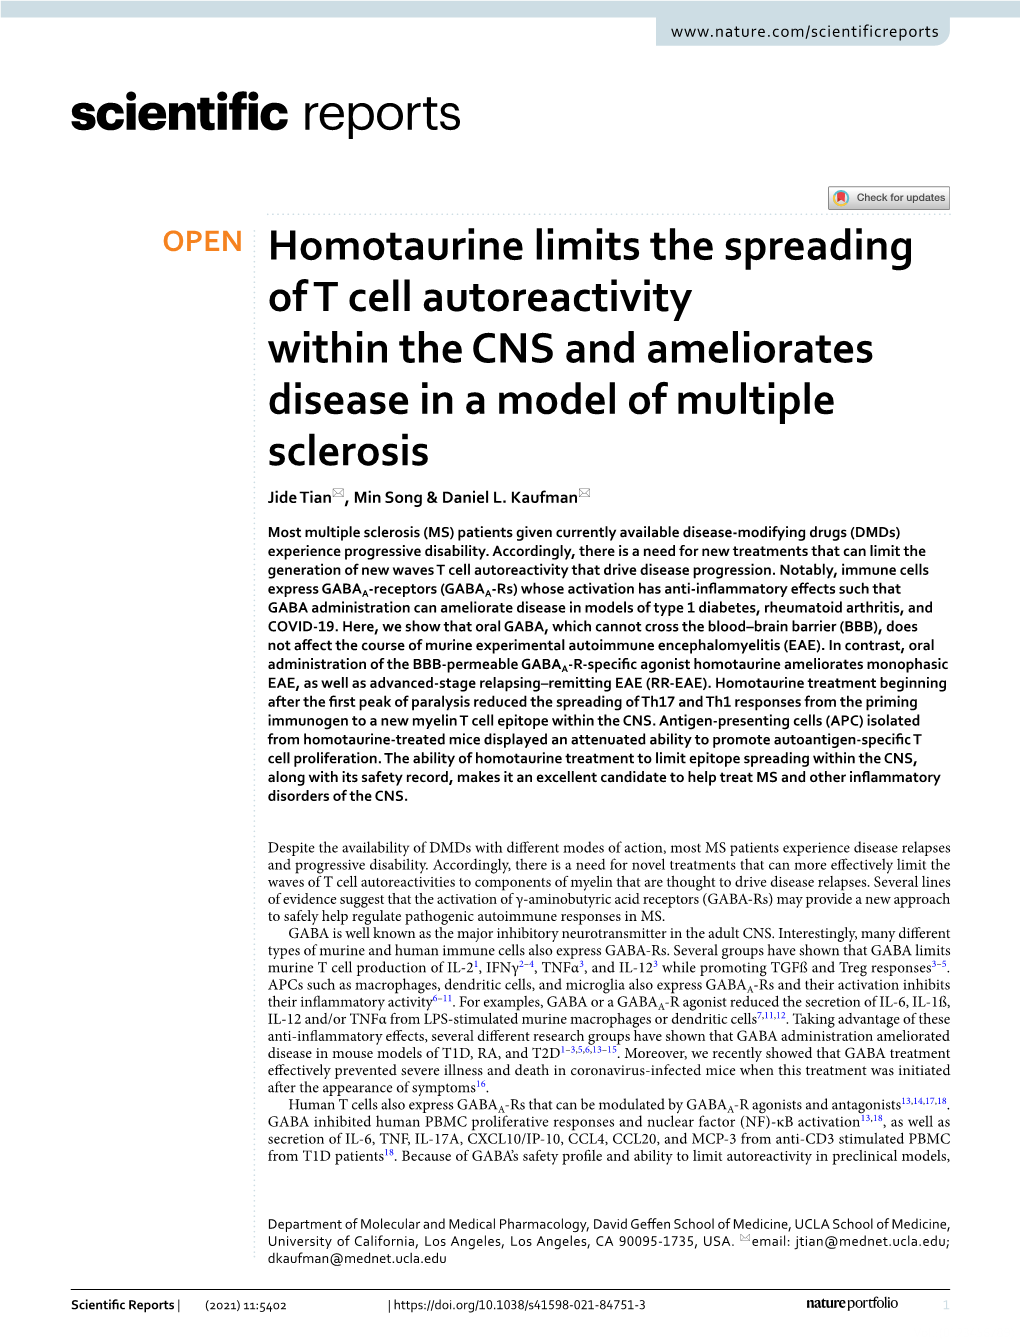 Homotaurine Limits the Spreading of T Cell Autoreactivity Within the CNS and Ameliorates Disease in a Model of Multiple Sclerosis Jide Tian*, Min Song & Daniel L